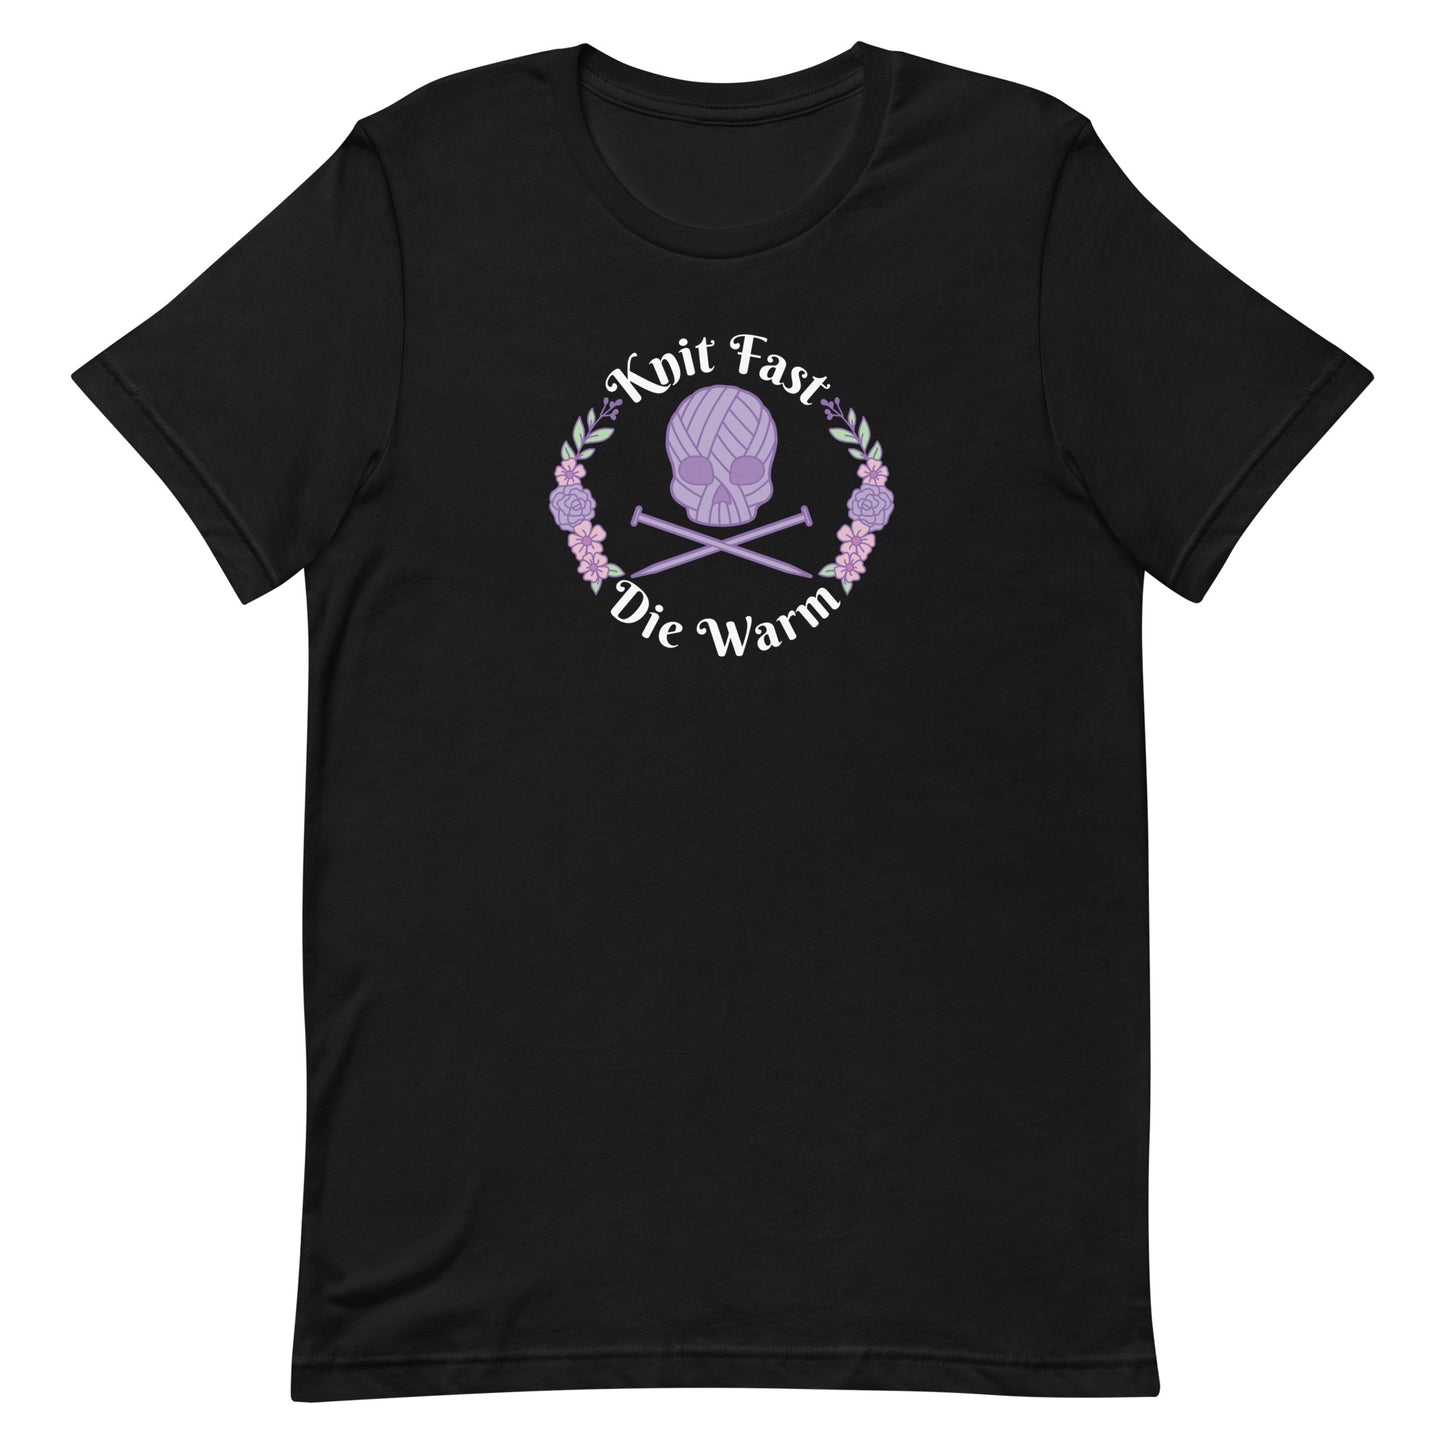 A black crewneck t-shirt featuring an image of a skull and crossbones made of yarn and knitting needles. A floral wreath surrounds the skull, along with words that read "Knit Fast, Die Warm"